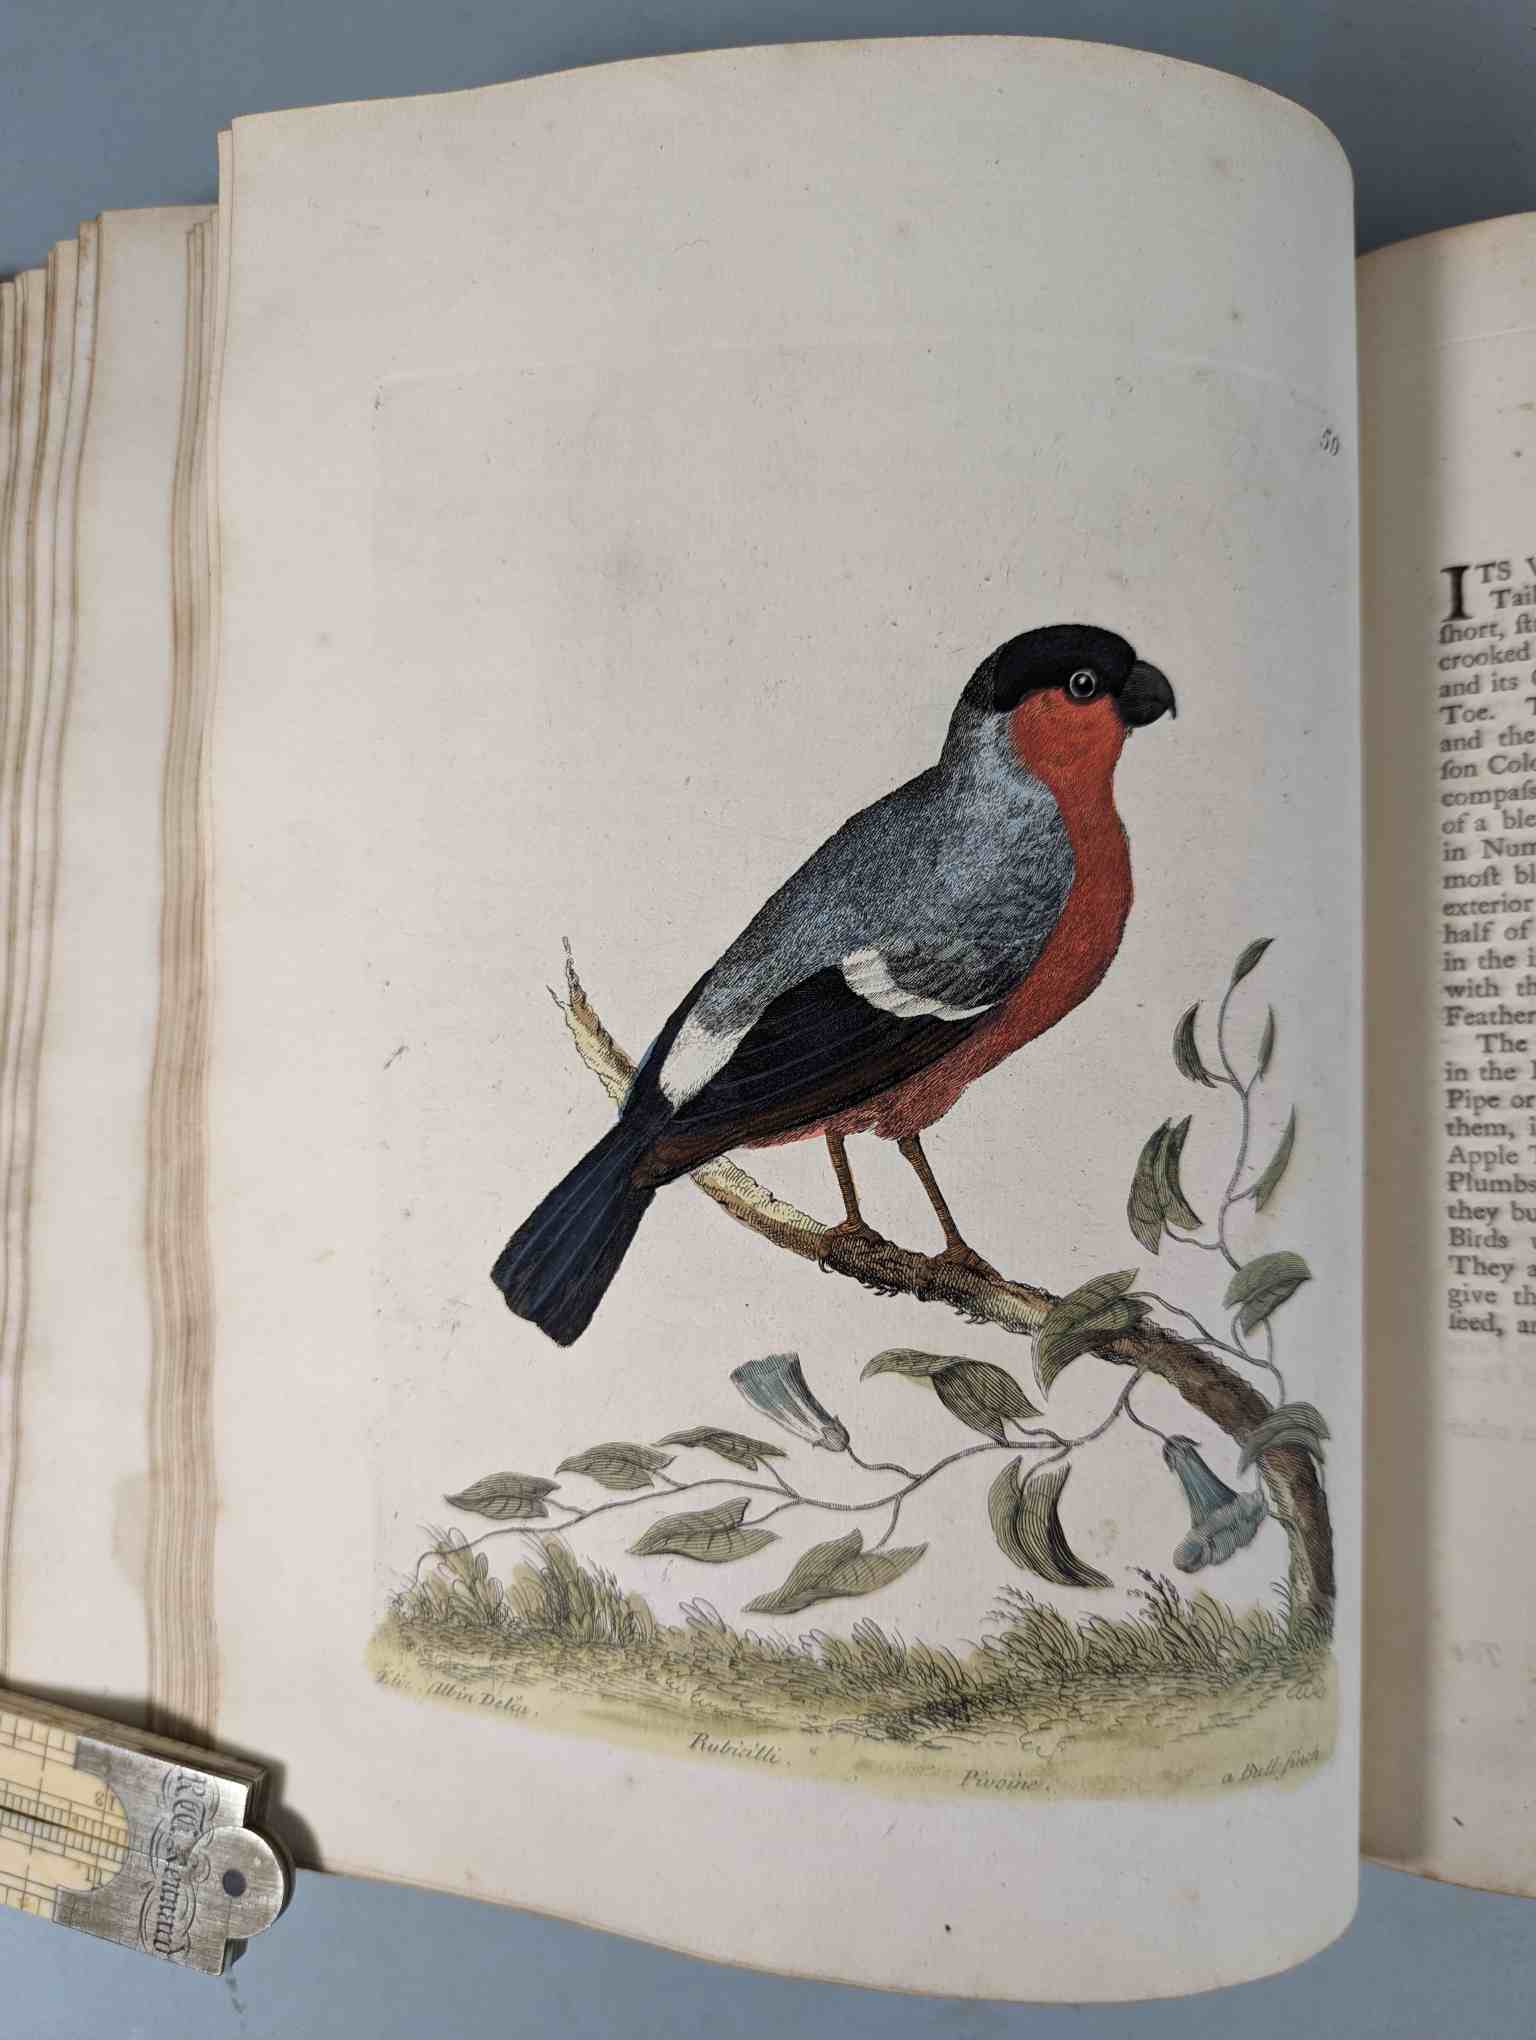 ALBIN, Eleazar. A Natural History of Birds, to which are added, Notes and Observations by W. - Image 63 of 208